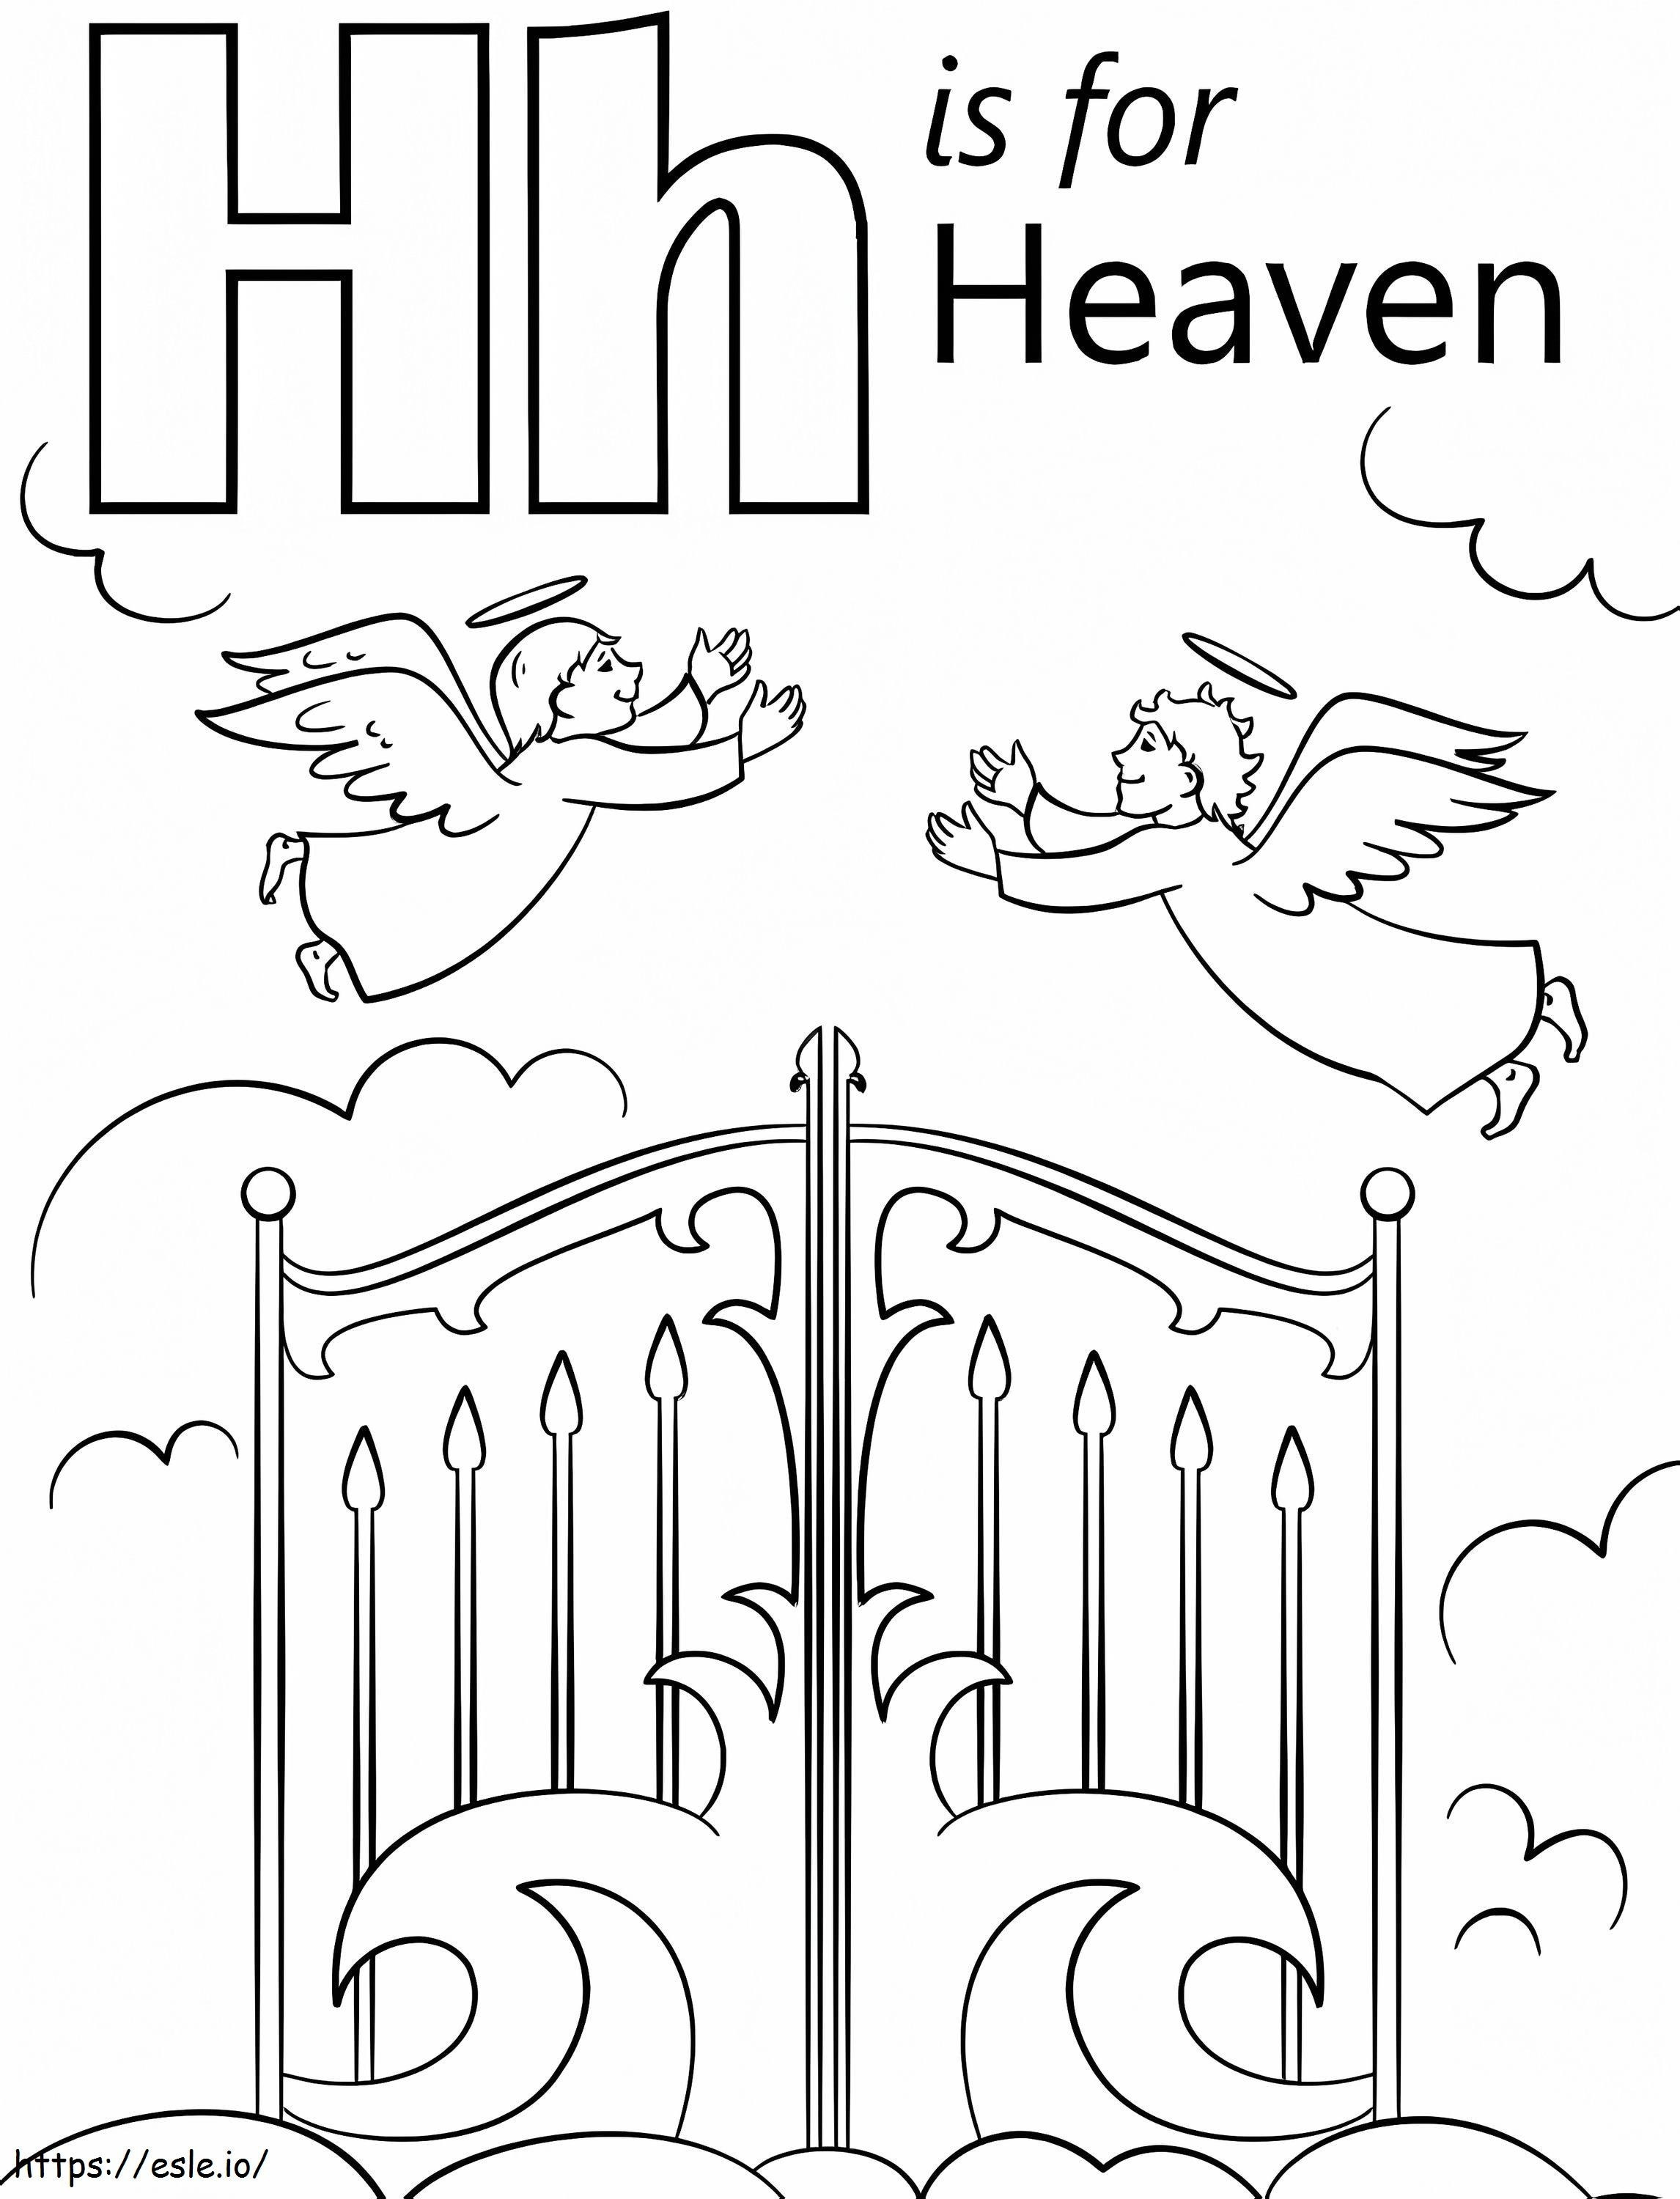 Sky Letter H coloring page